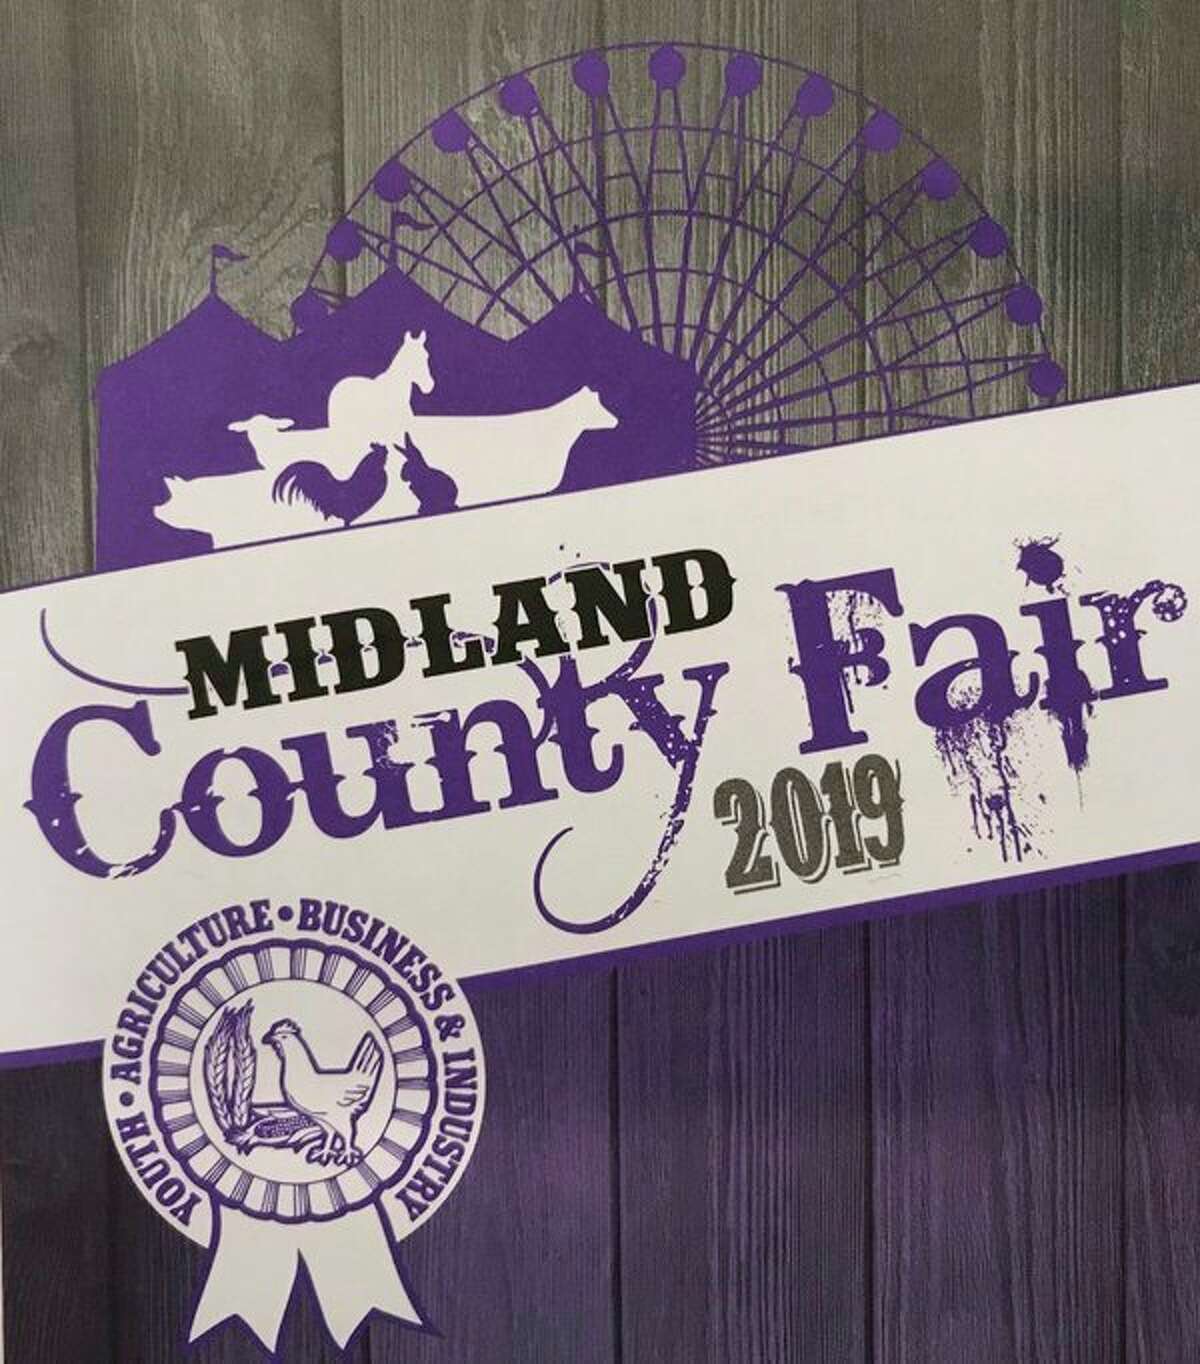 Midland County Fair is scheduled for Aug. 11-17 at the Midland County Fairgrounds.